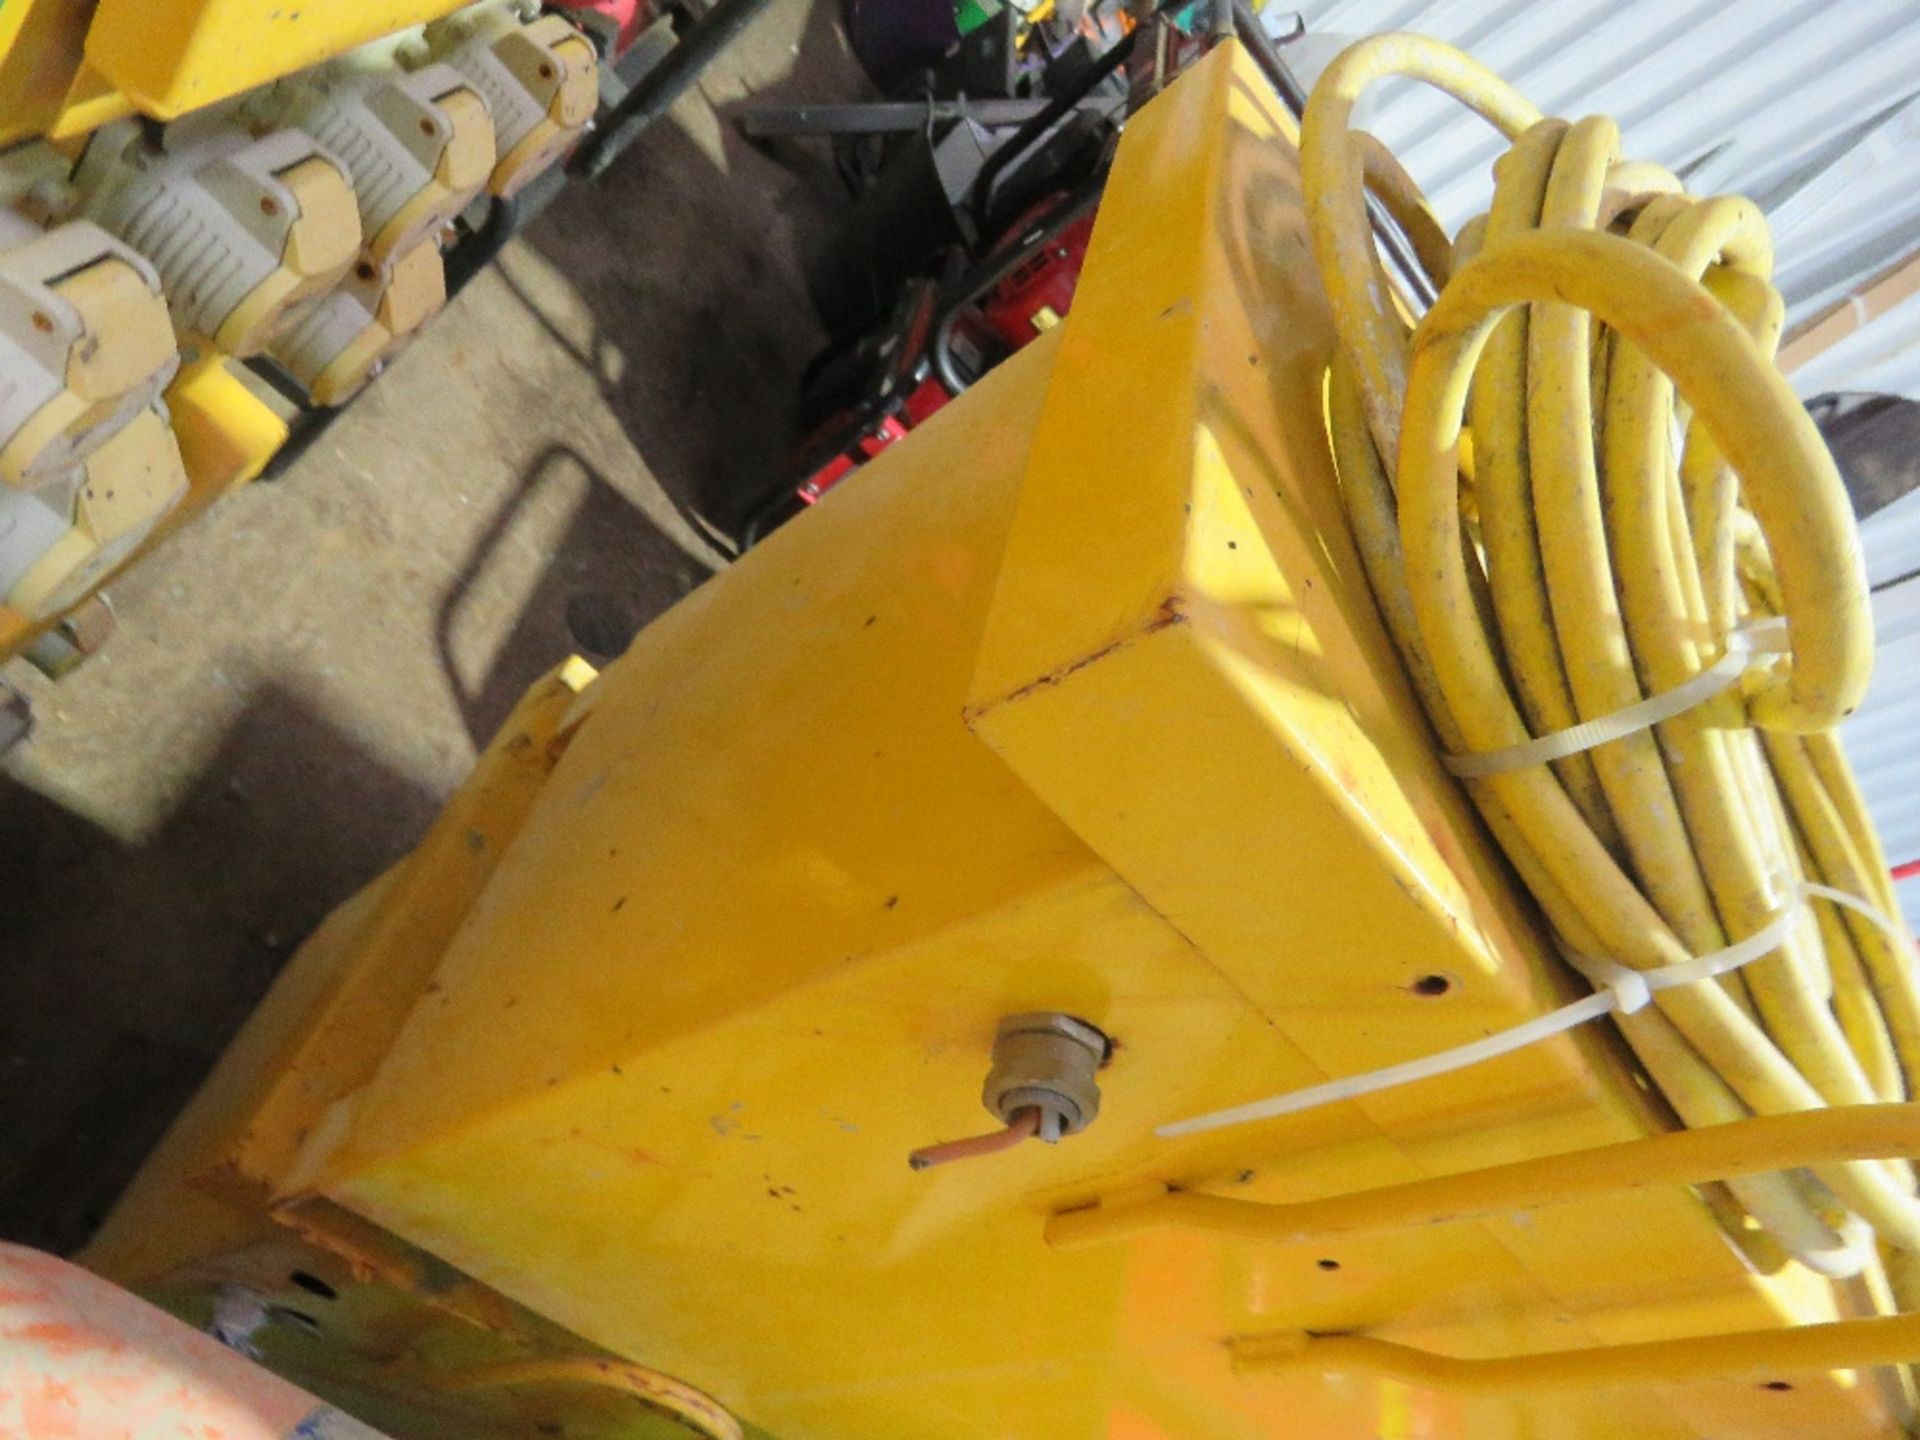 2 X LARGE SIZED SITE TRANSFORMERS, YELLOW PLUS AN EXTENSION LEAD. - Image 3 of 4